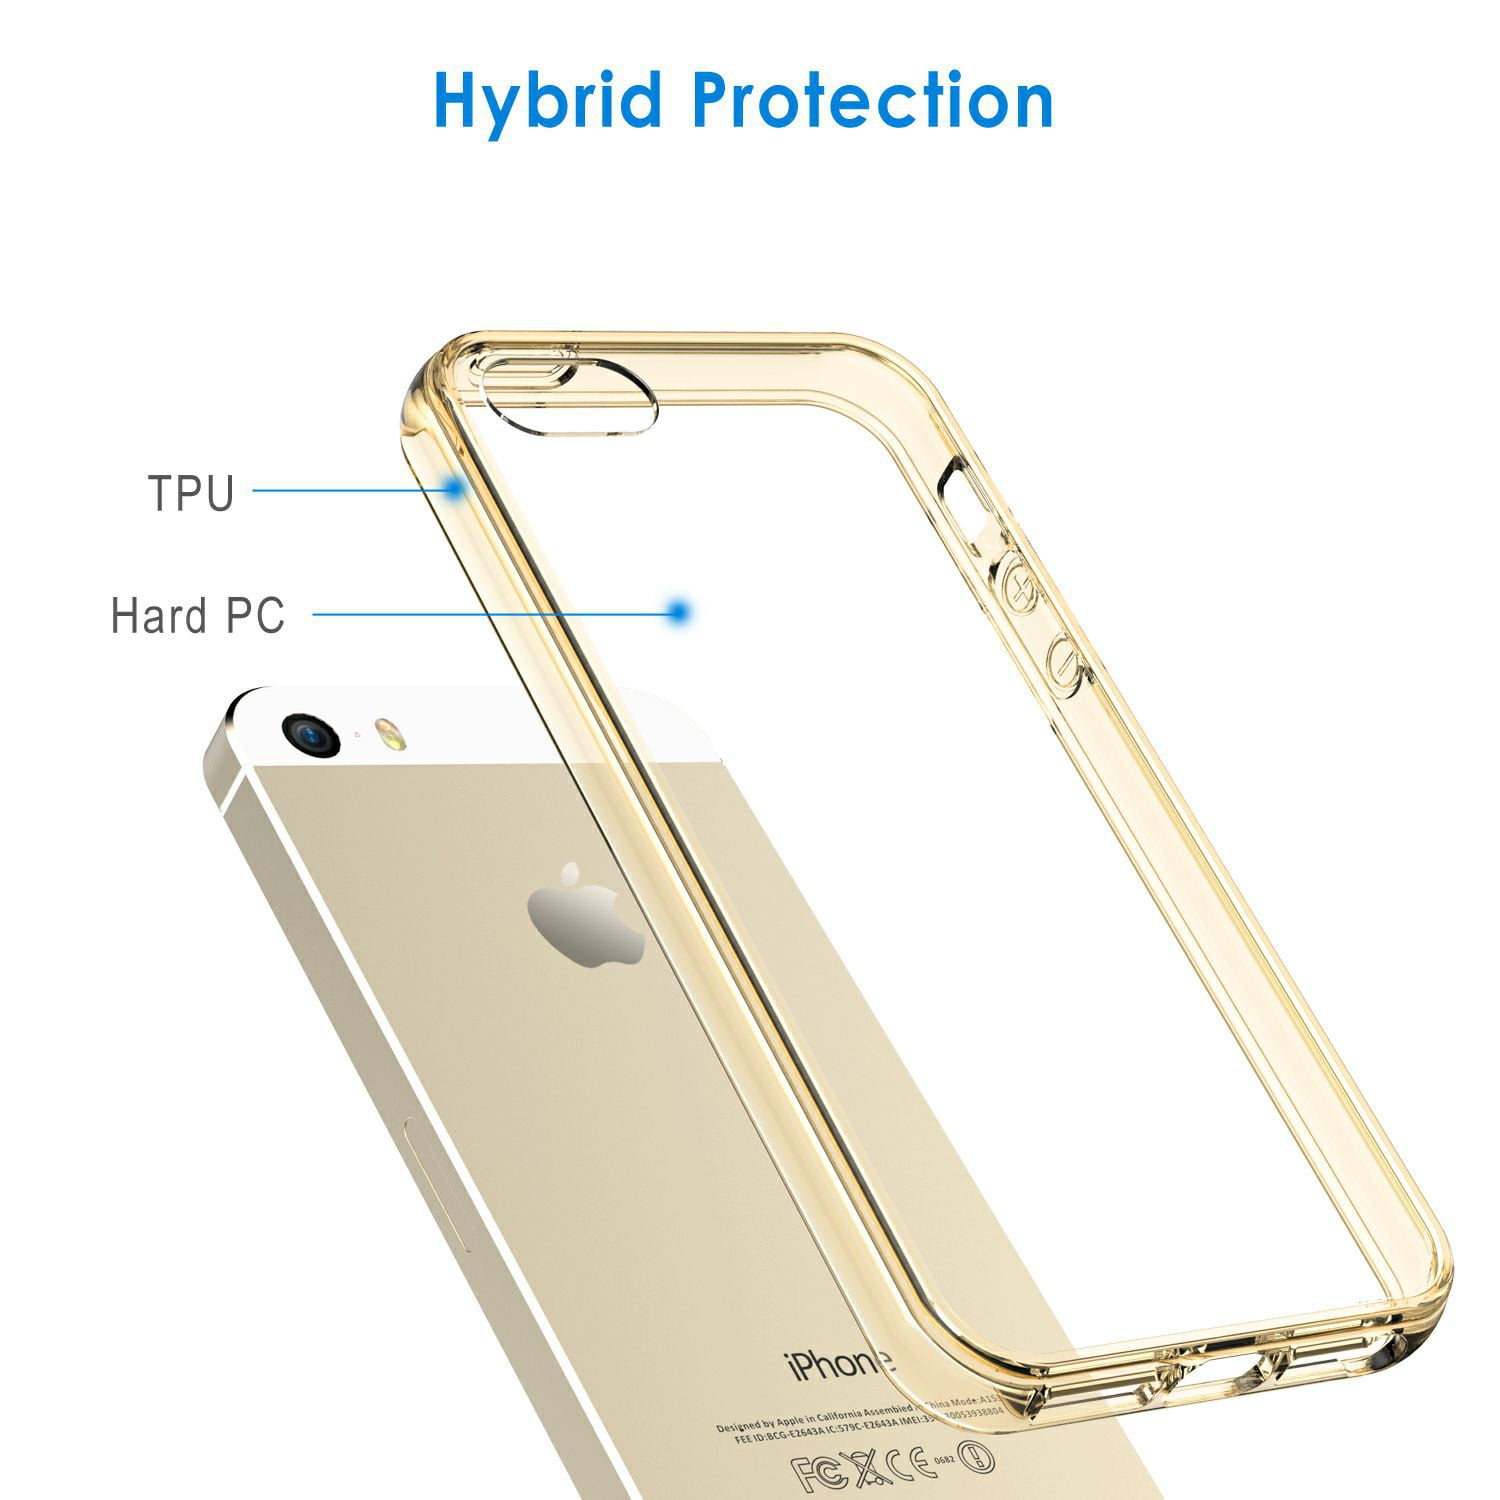  JETech Case for iPhone SE 2016 (Not for 2020), iPhone 5s and  iPhone 5, Non-Yellowing Shockproof Phone Bumper Cover, Anti-Scratch Clear  Back (Clear) : Cell Phones & Accessories